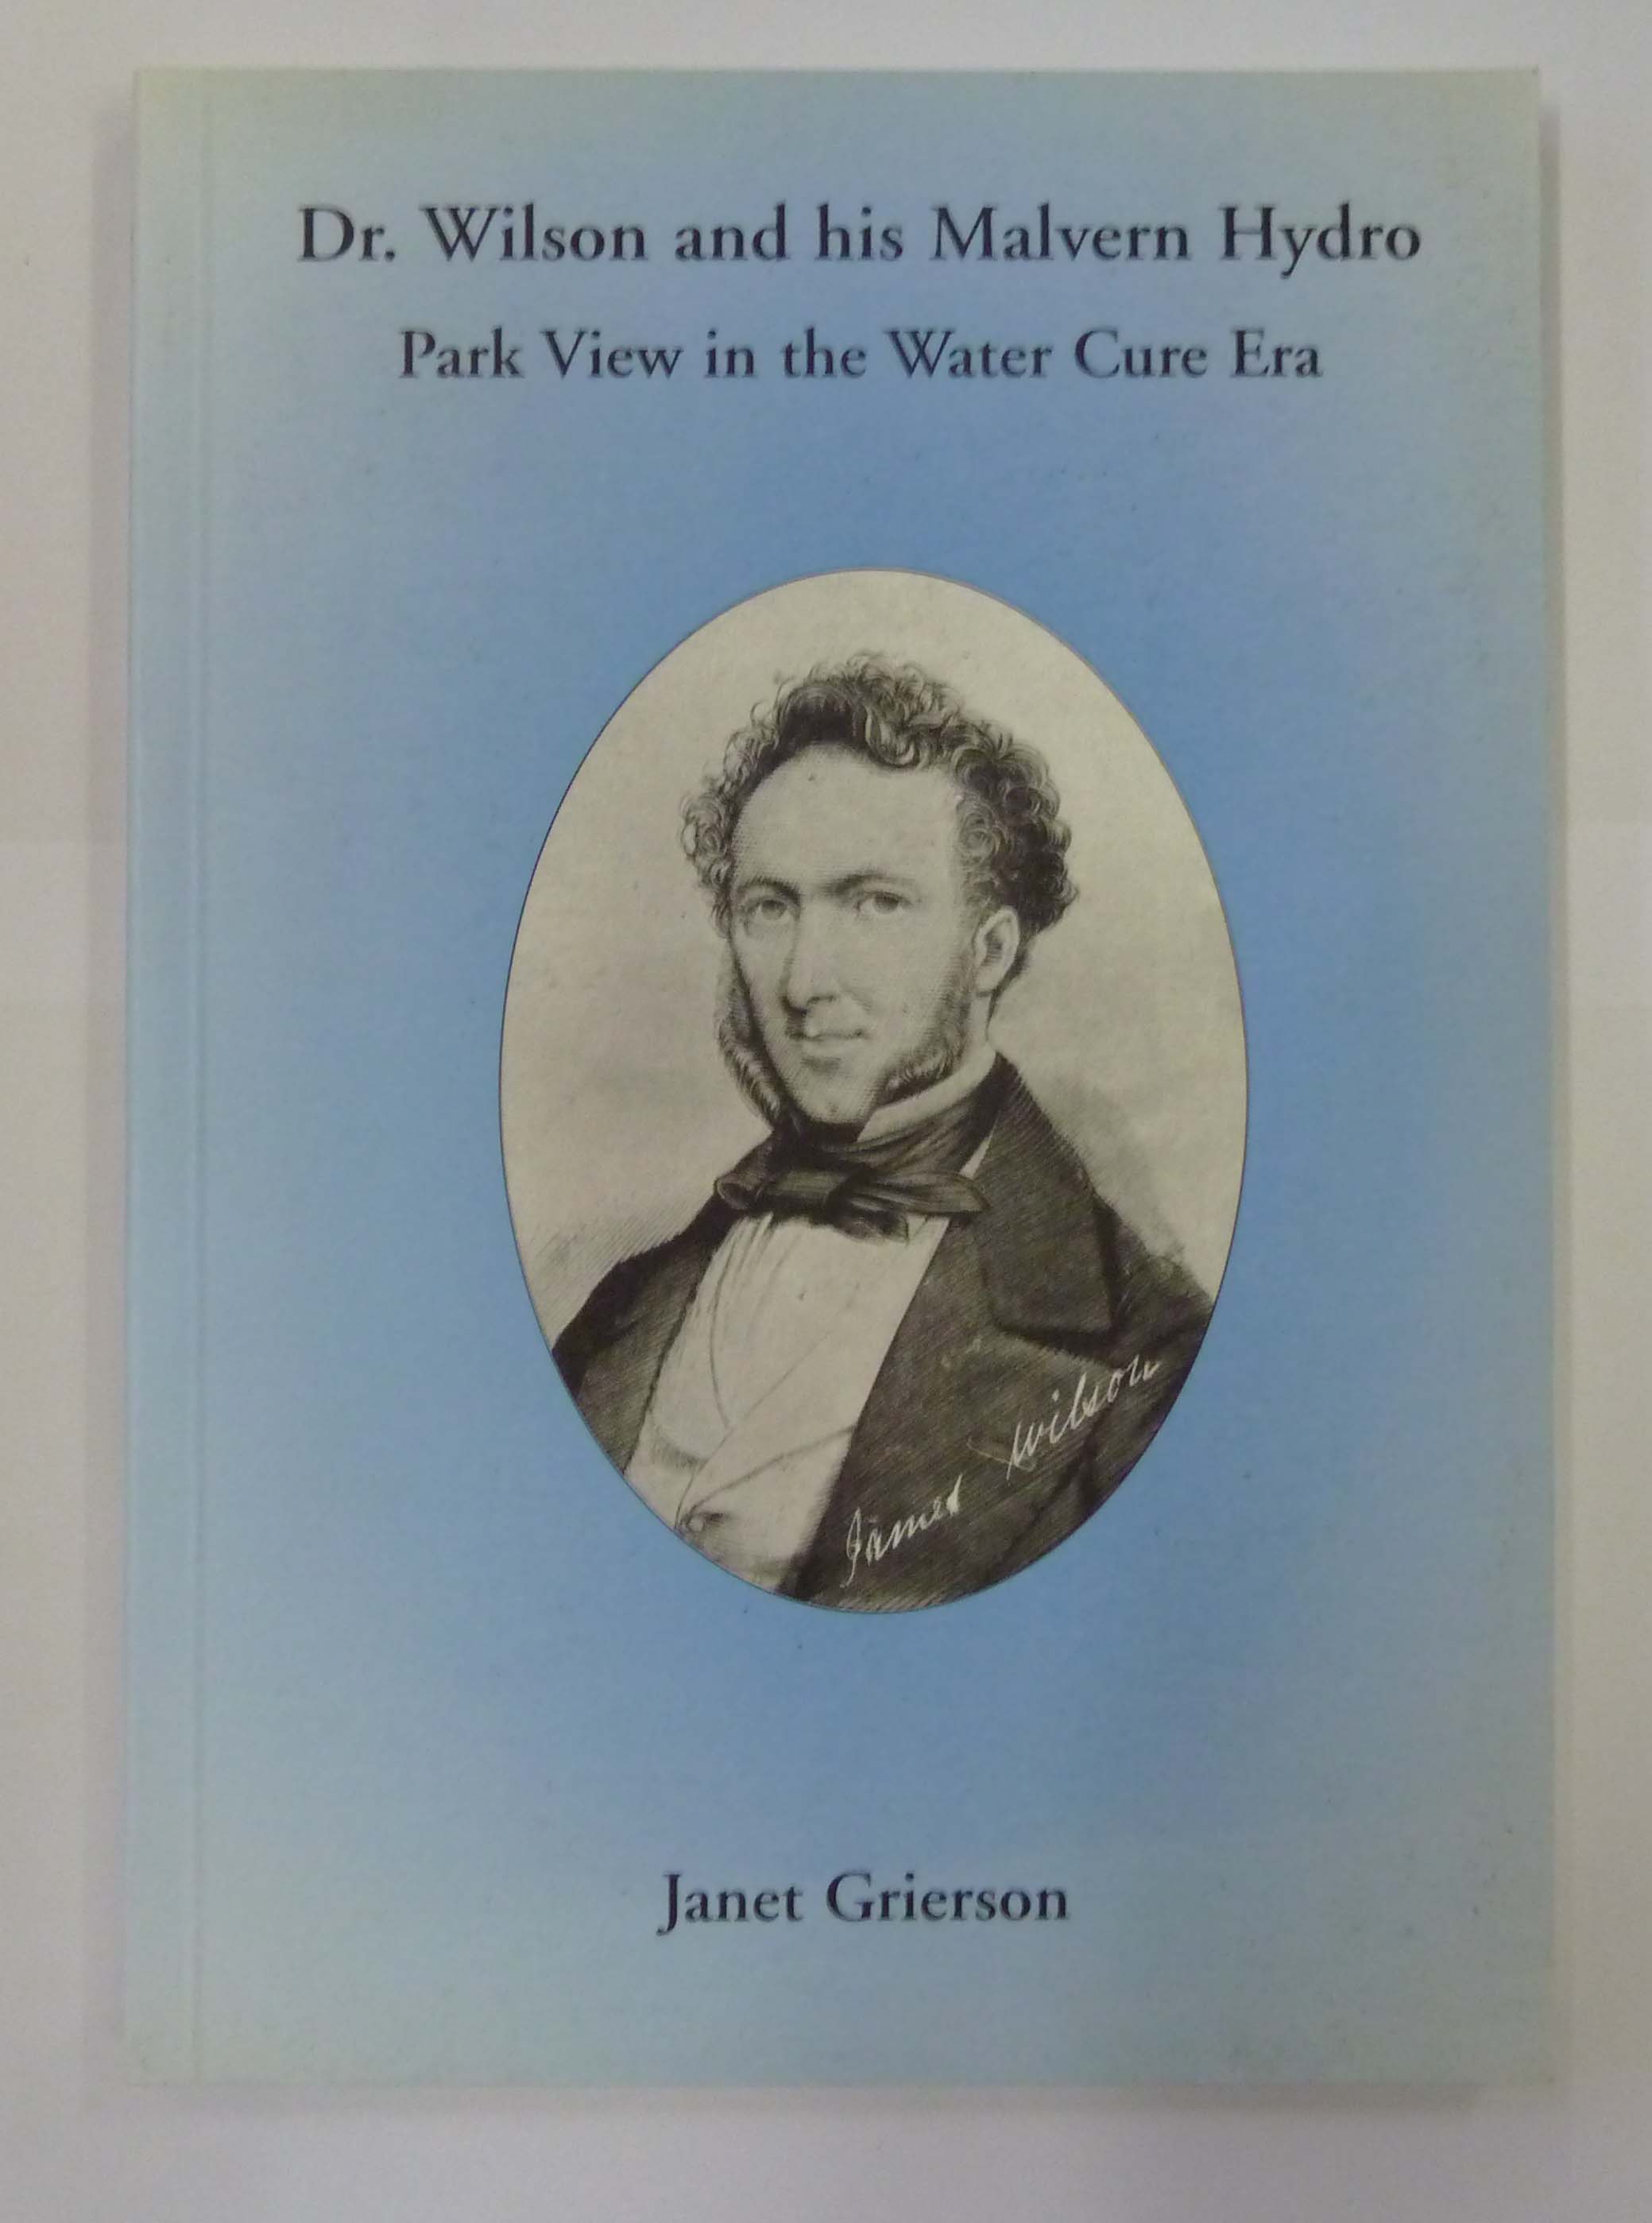 Dr Wilson and his Malvern Hydro Park View in the Water Cure Era